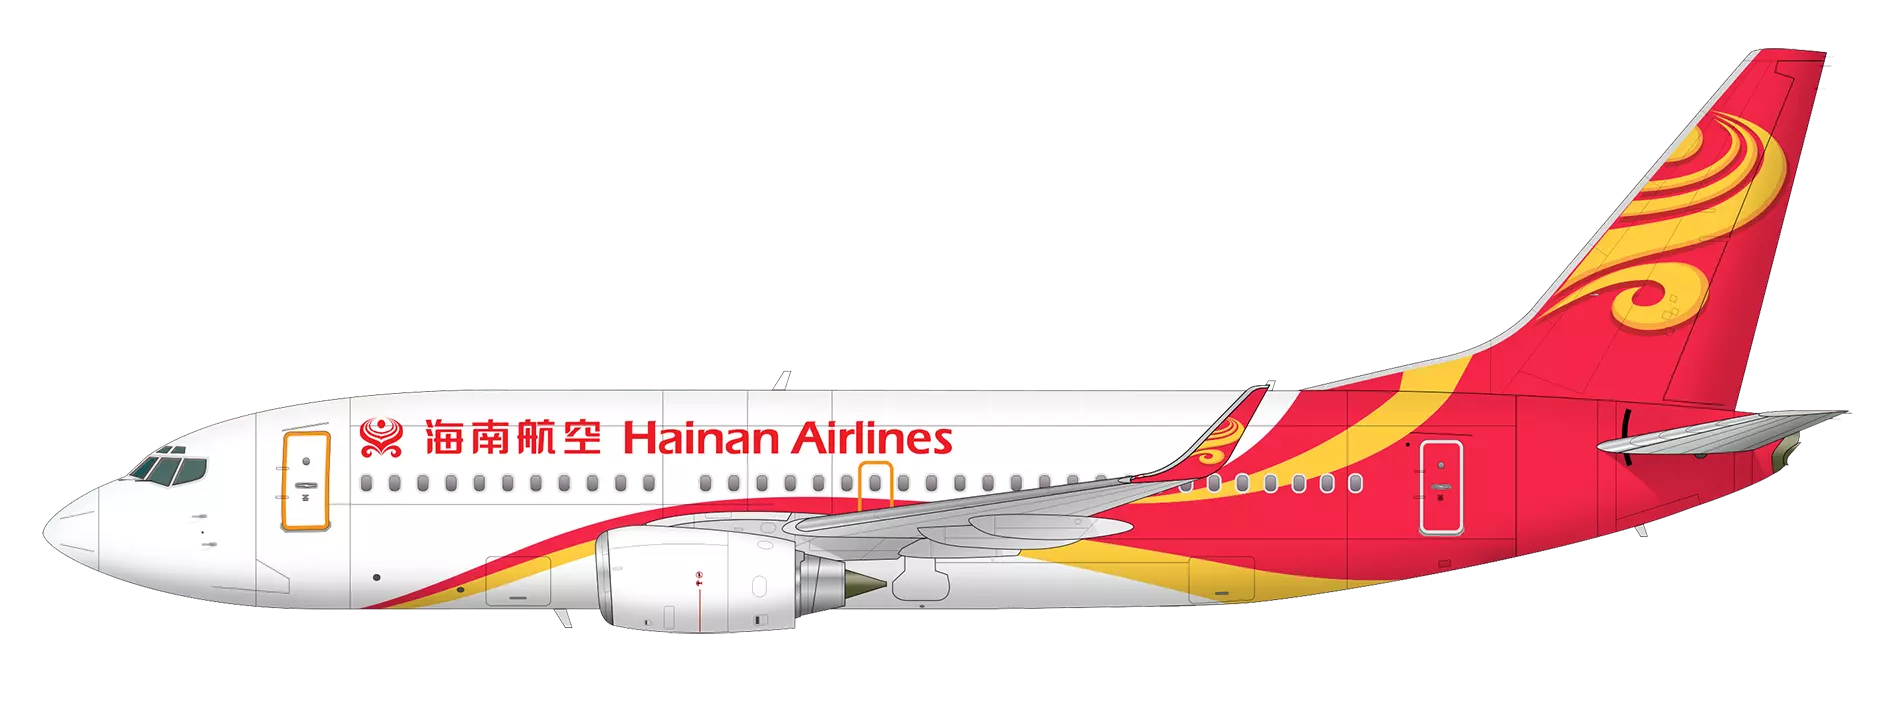 Hainan airlines